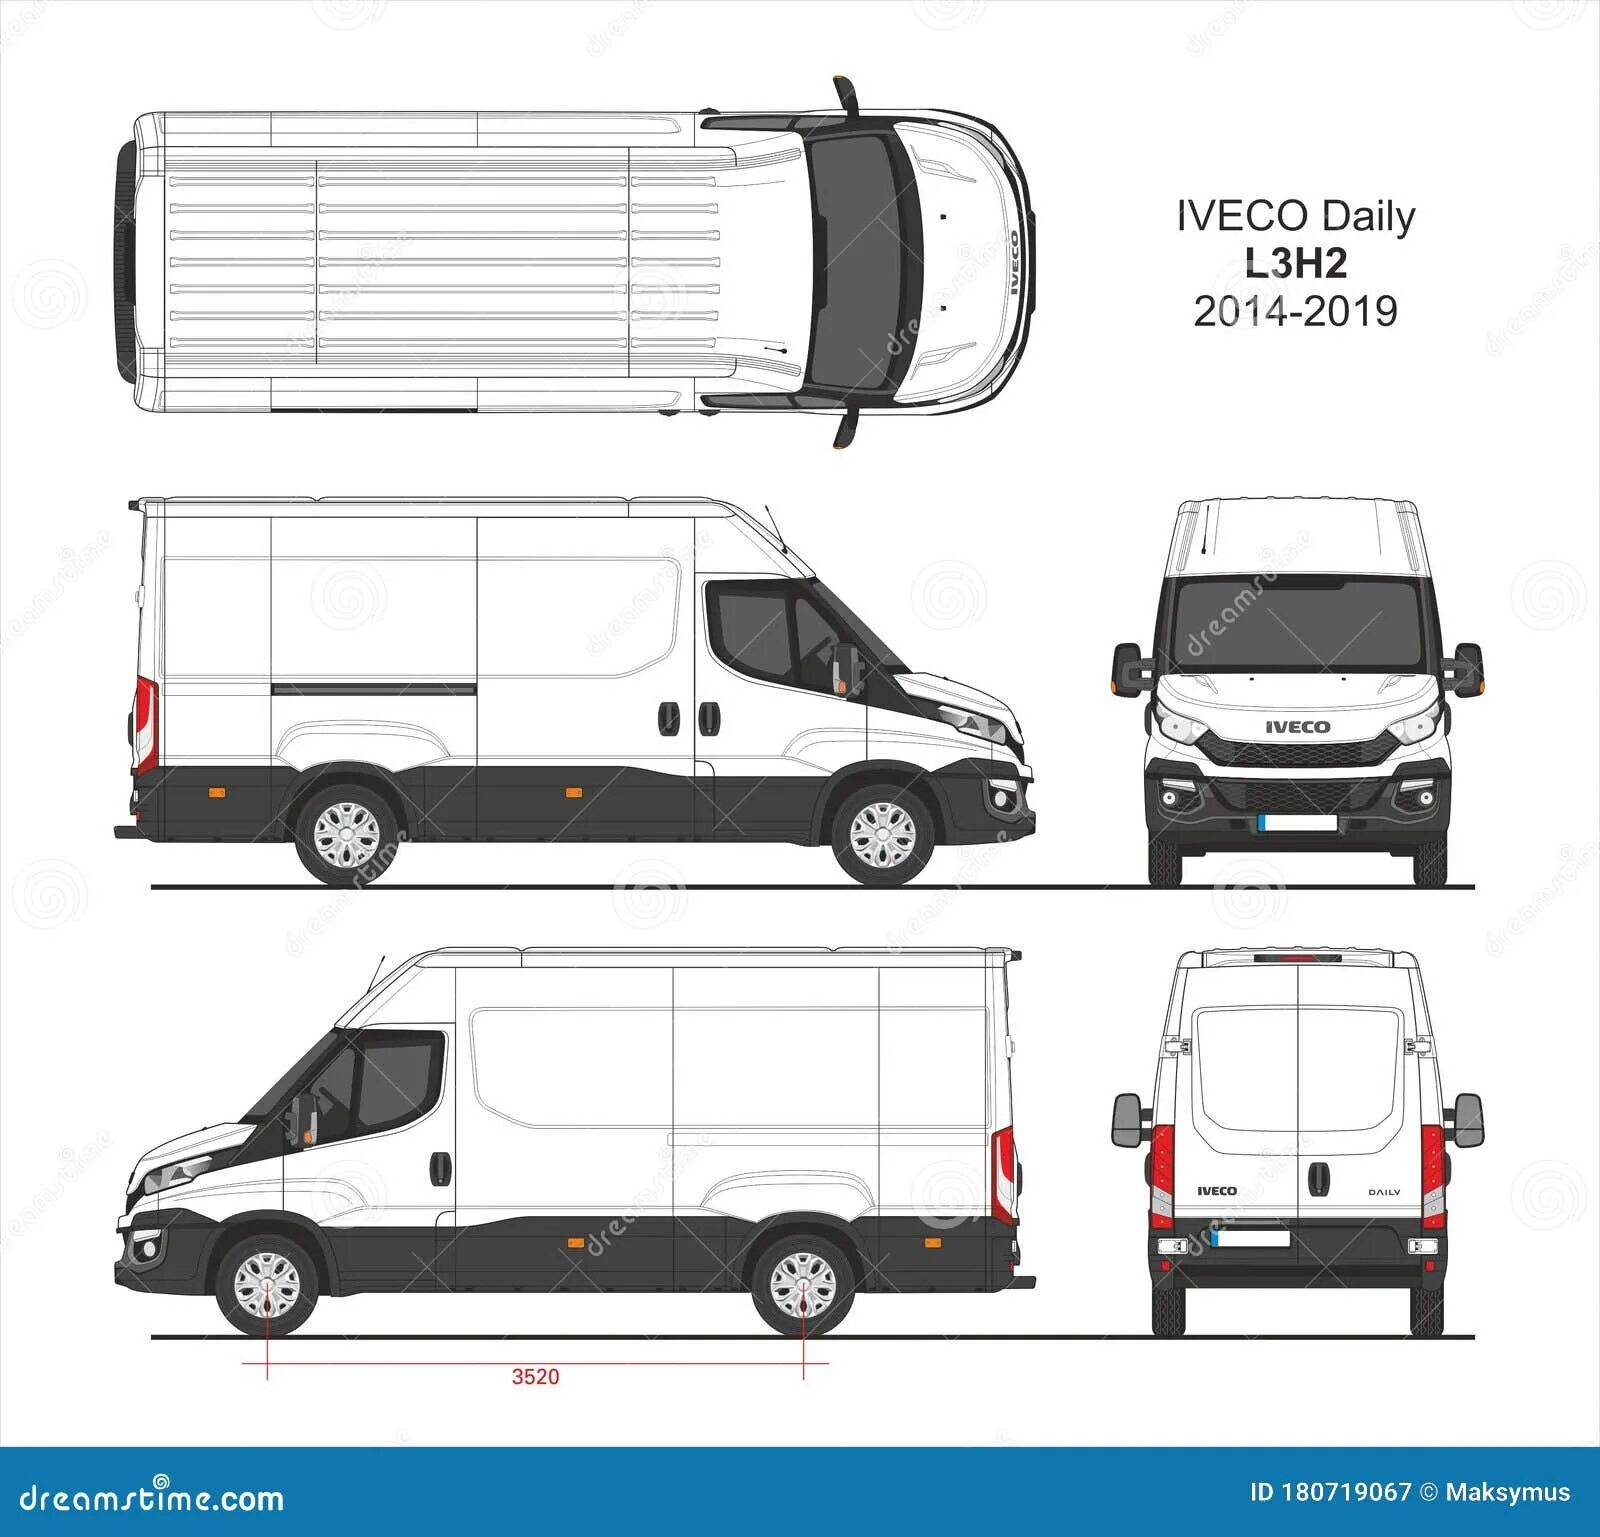 Iveco Daily 2.3 l3h2 Size. Iveco Daily l3h2 габариты. Ивеко Дейли h2 l2 Combi. Iveco Daily 2.3 l3h2 Размеры.